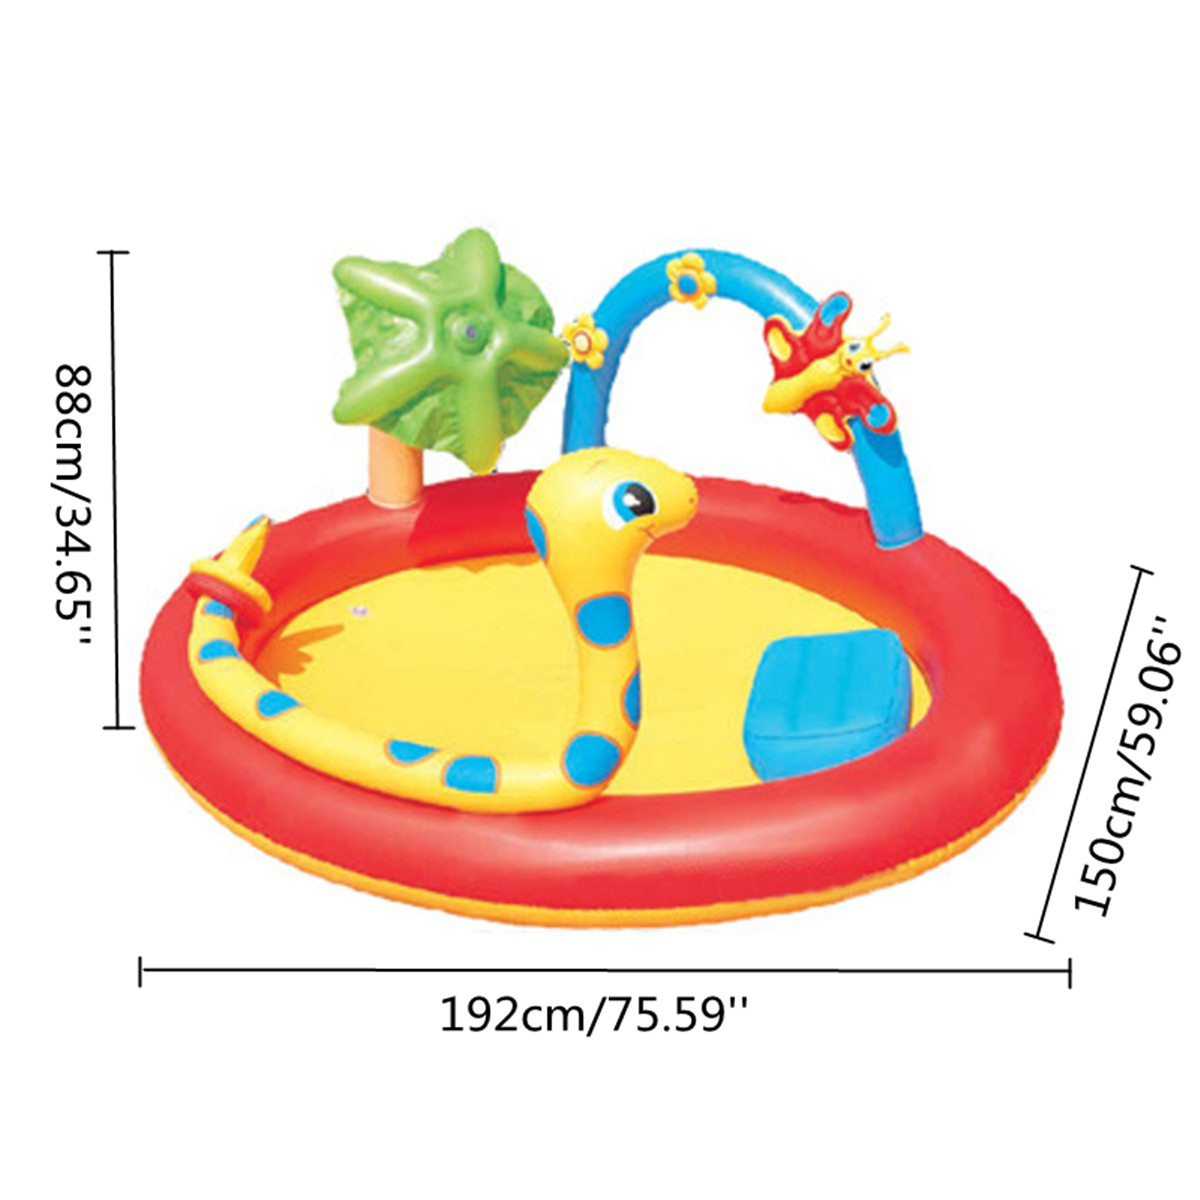 192x150x88cm-PVC-Inflatable-Swimming-Pool-Children-Kids-Outdoor-Safe-Water-Play-1245831